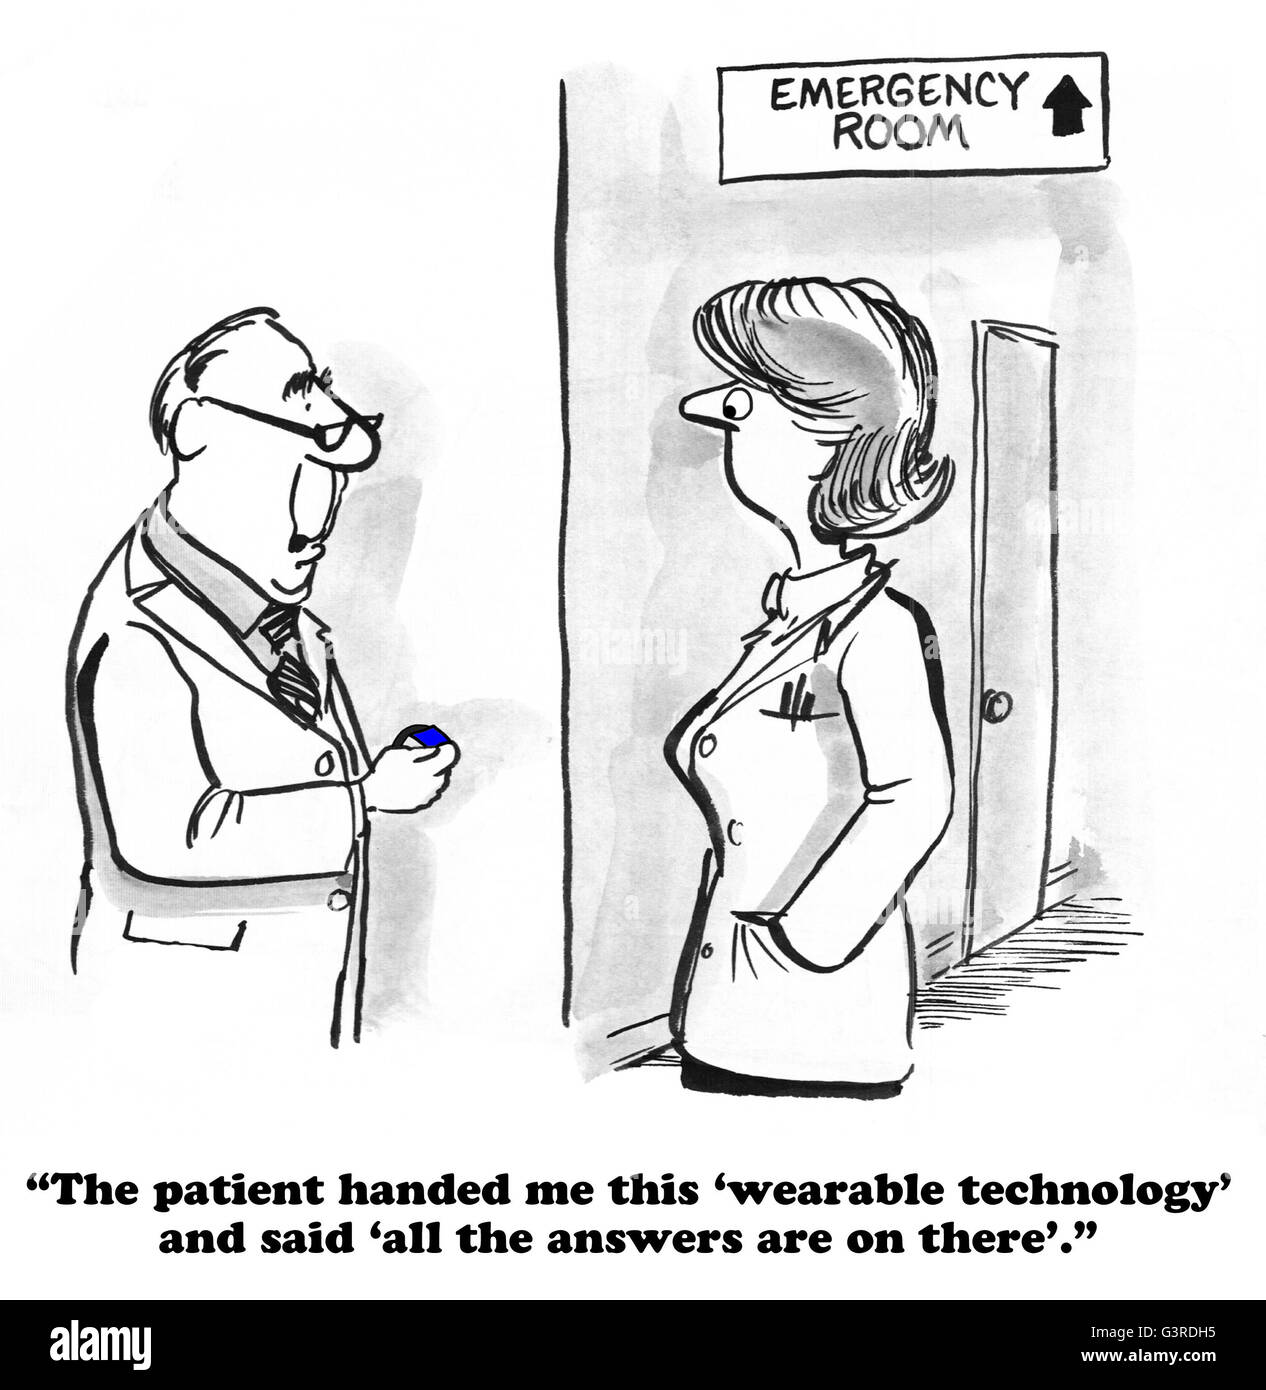 Medical cartoon about wearable technology. Stock Photo